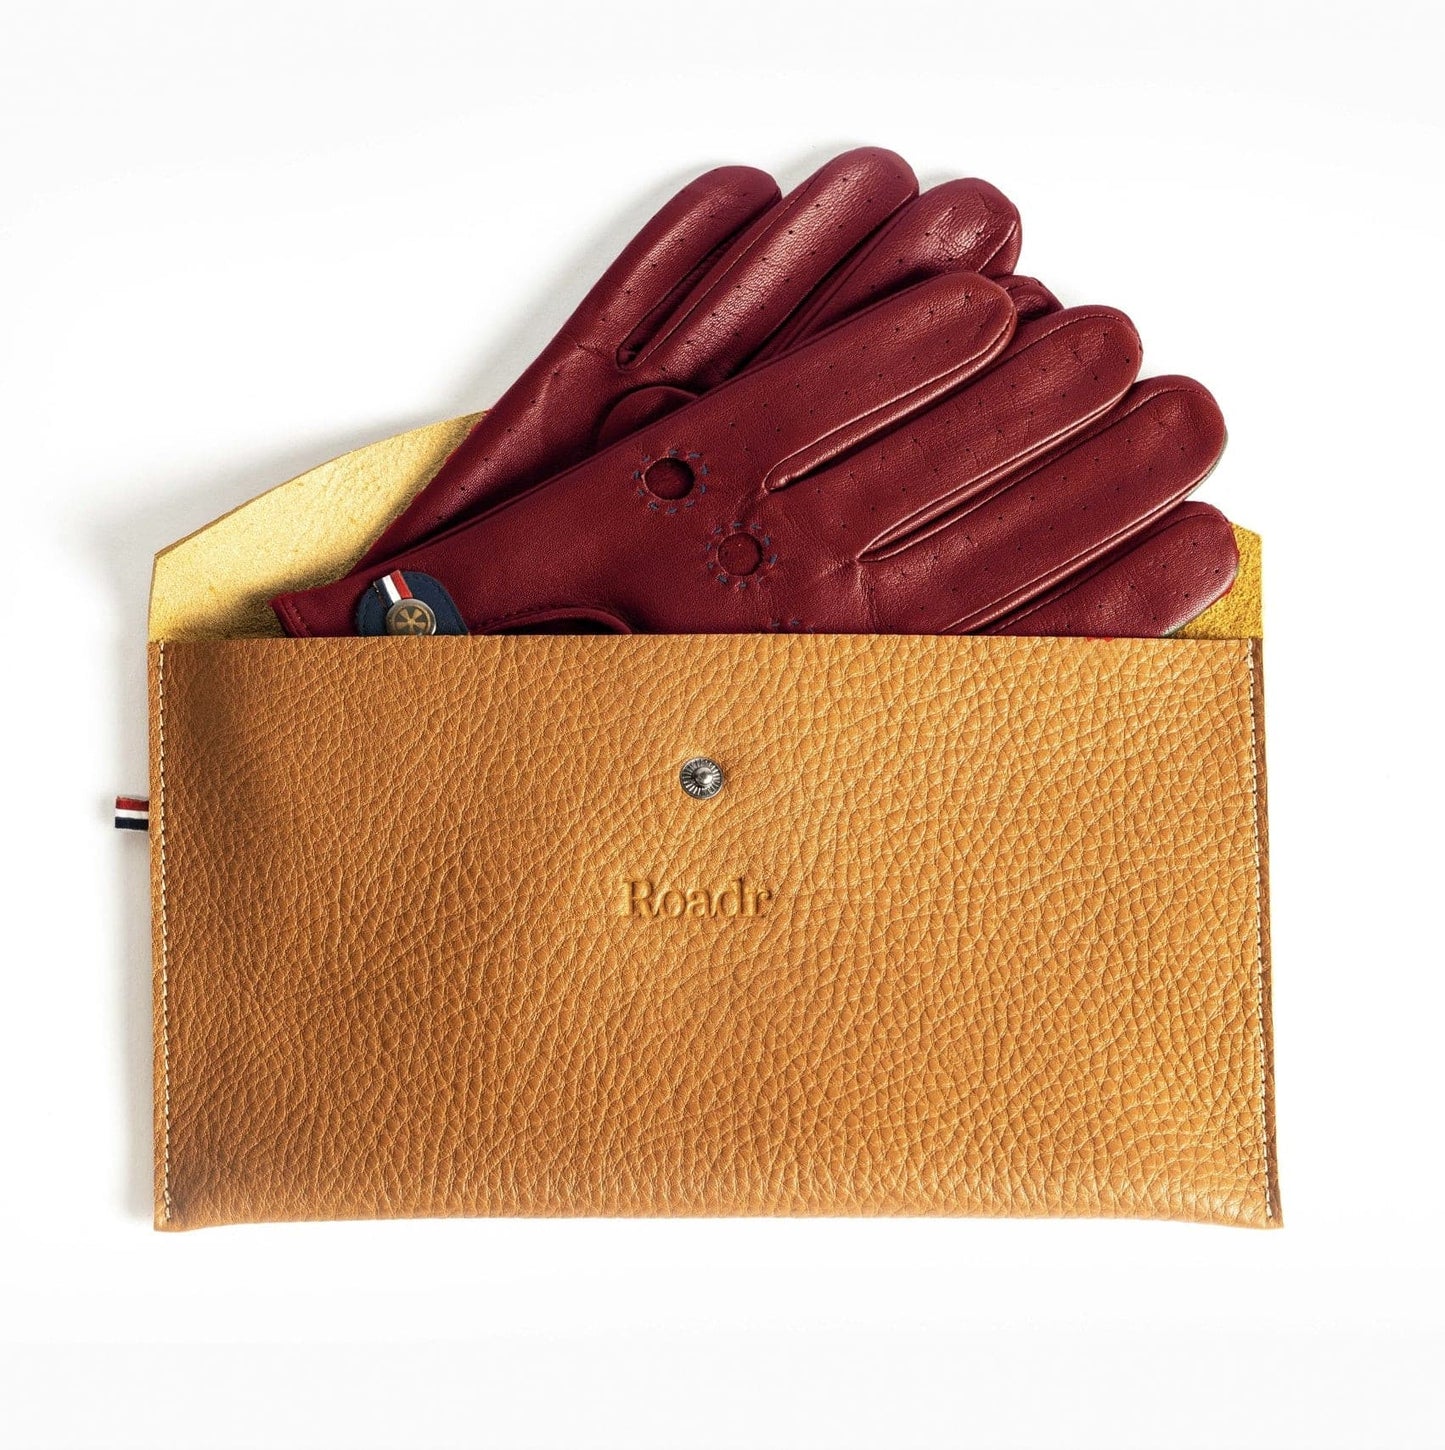 Classic red leather driving racing gloves sleeve